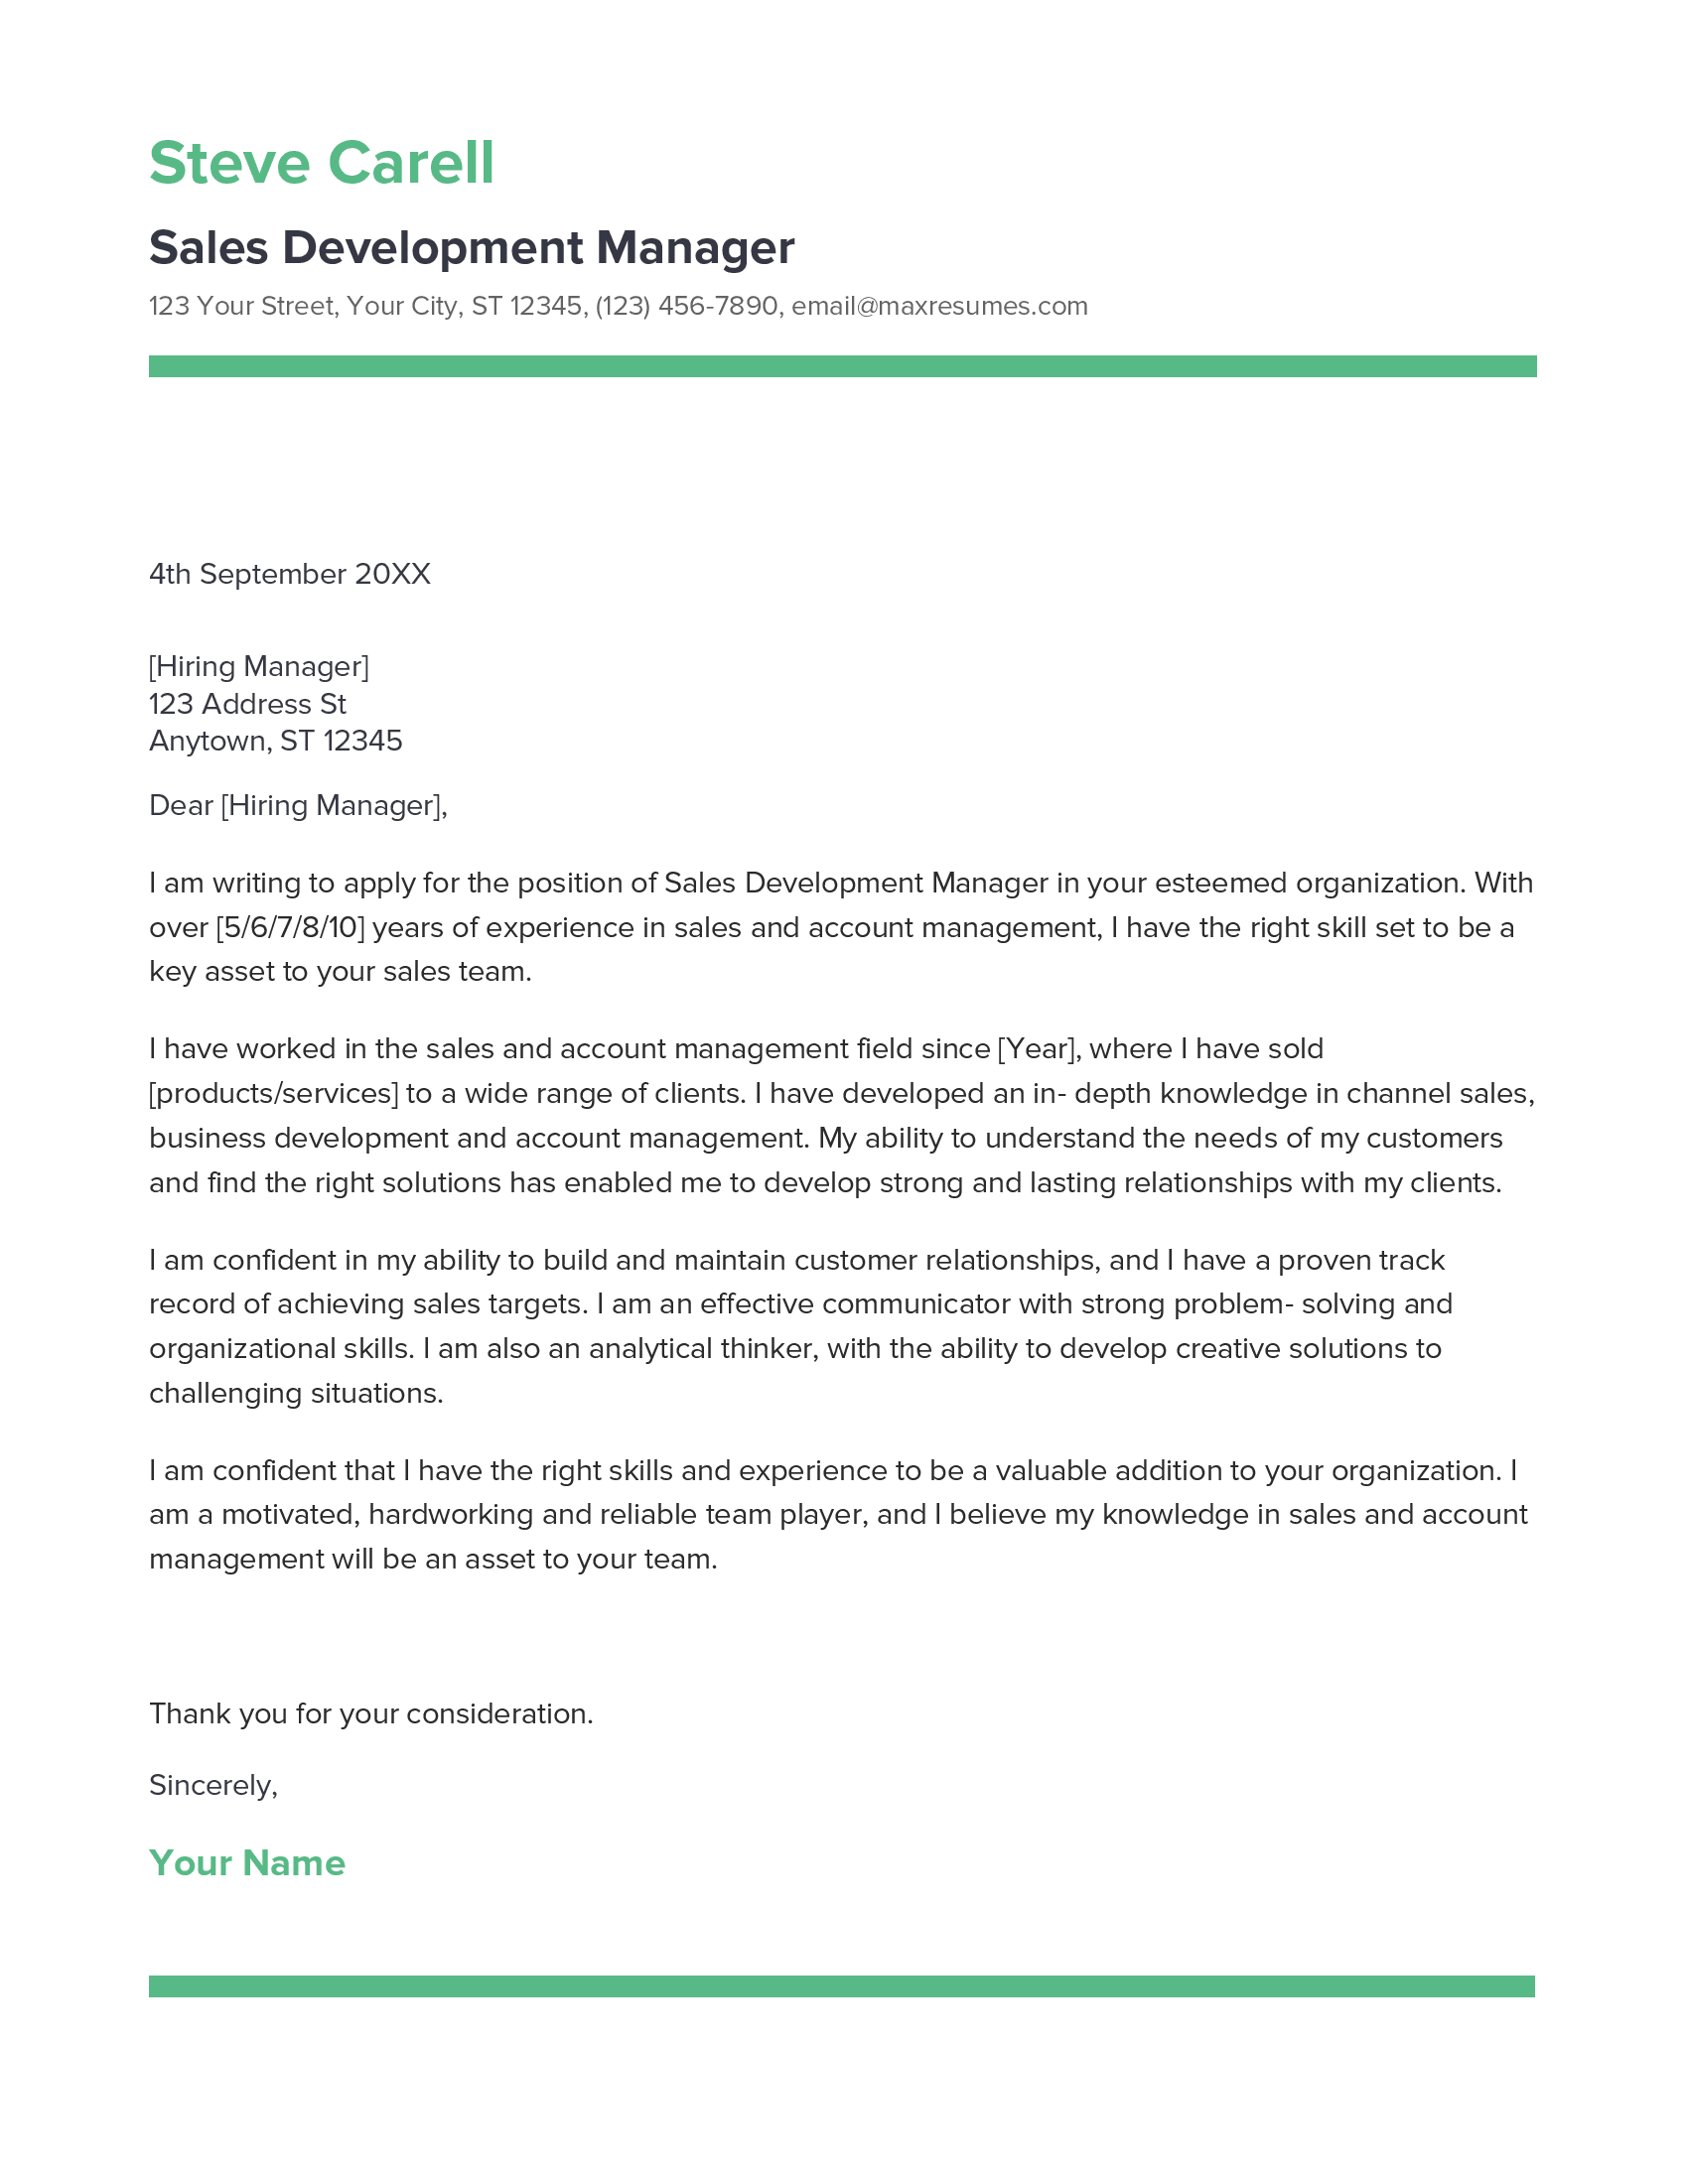 Sales Development Manager Cover Letter Example